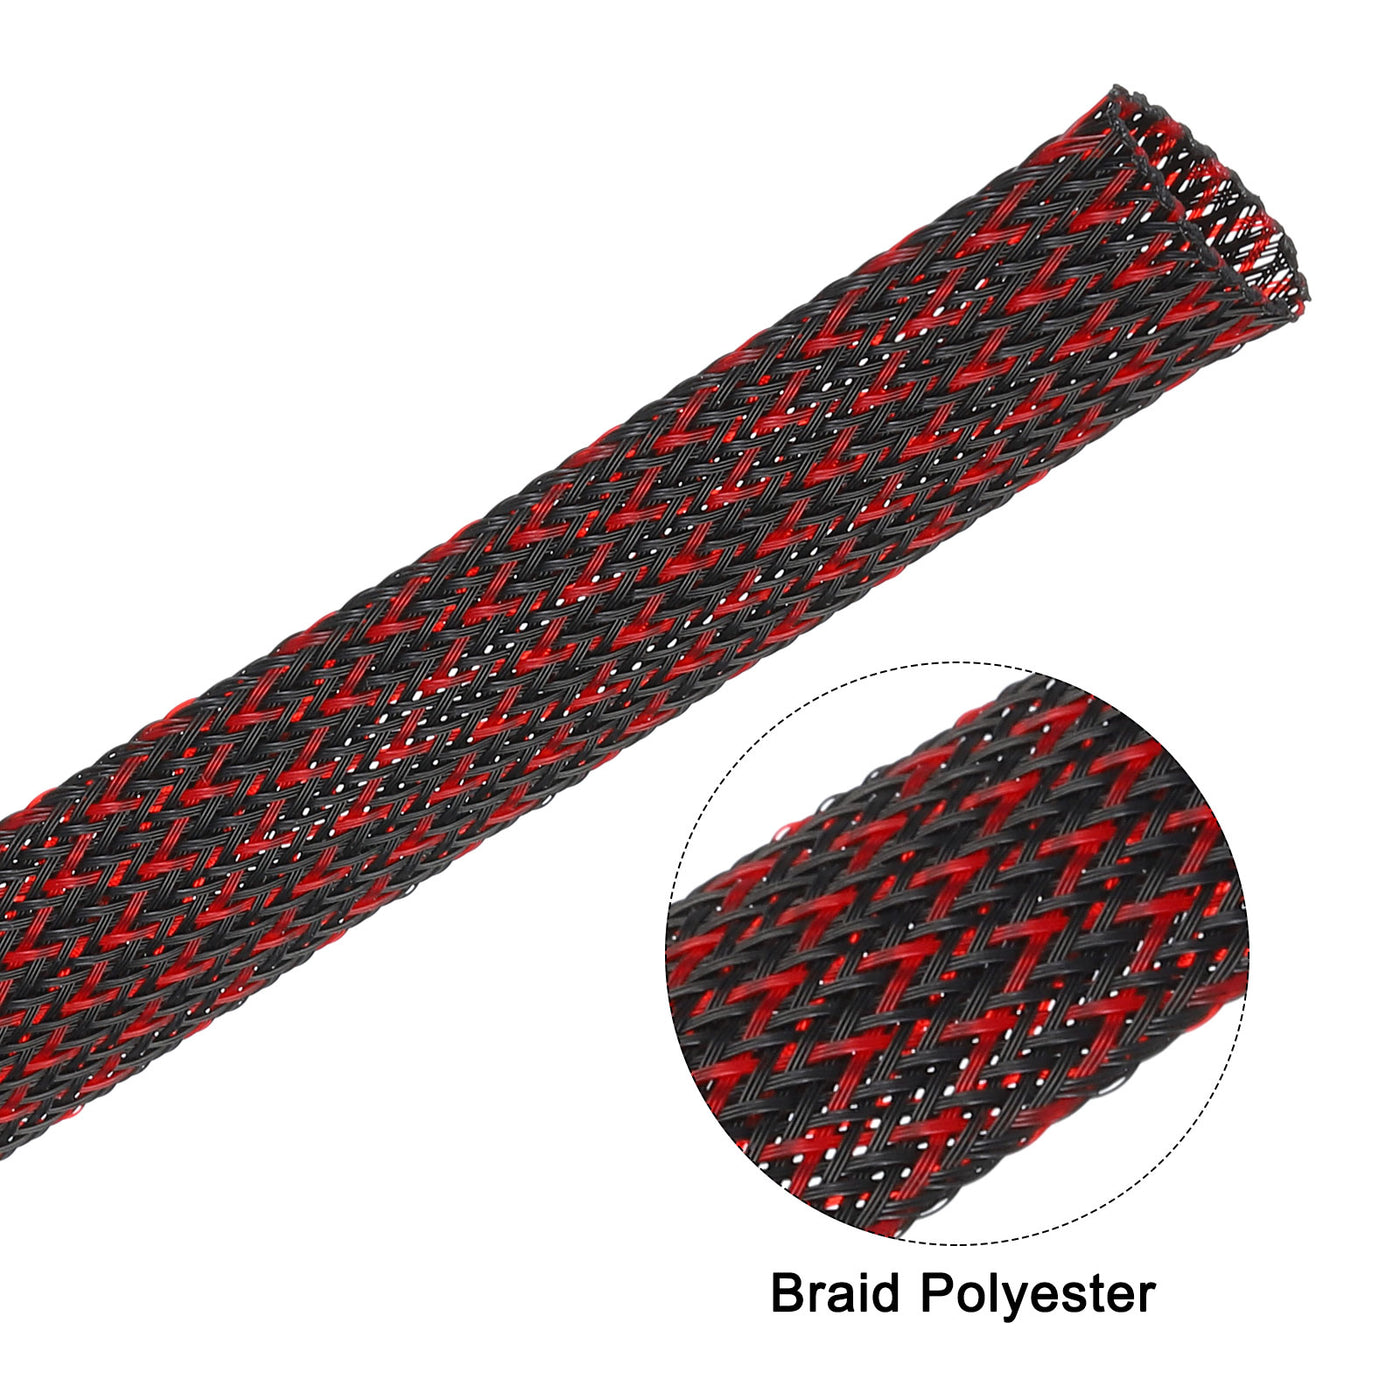 uxcell Uxcell Insulation Braid Sleeving, 9.84 Ft-25mm High Temperature Sleeve Black Red